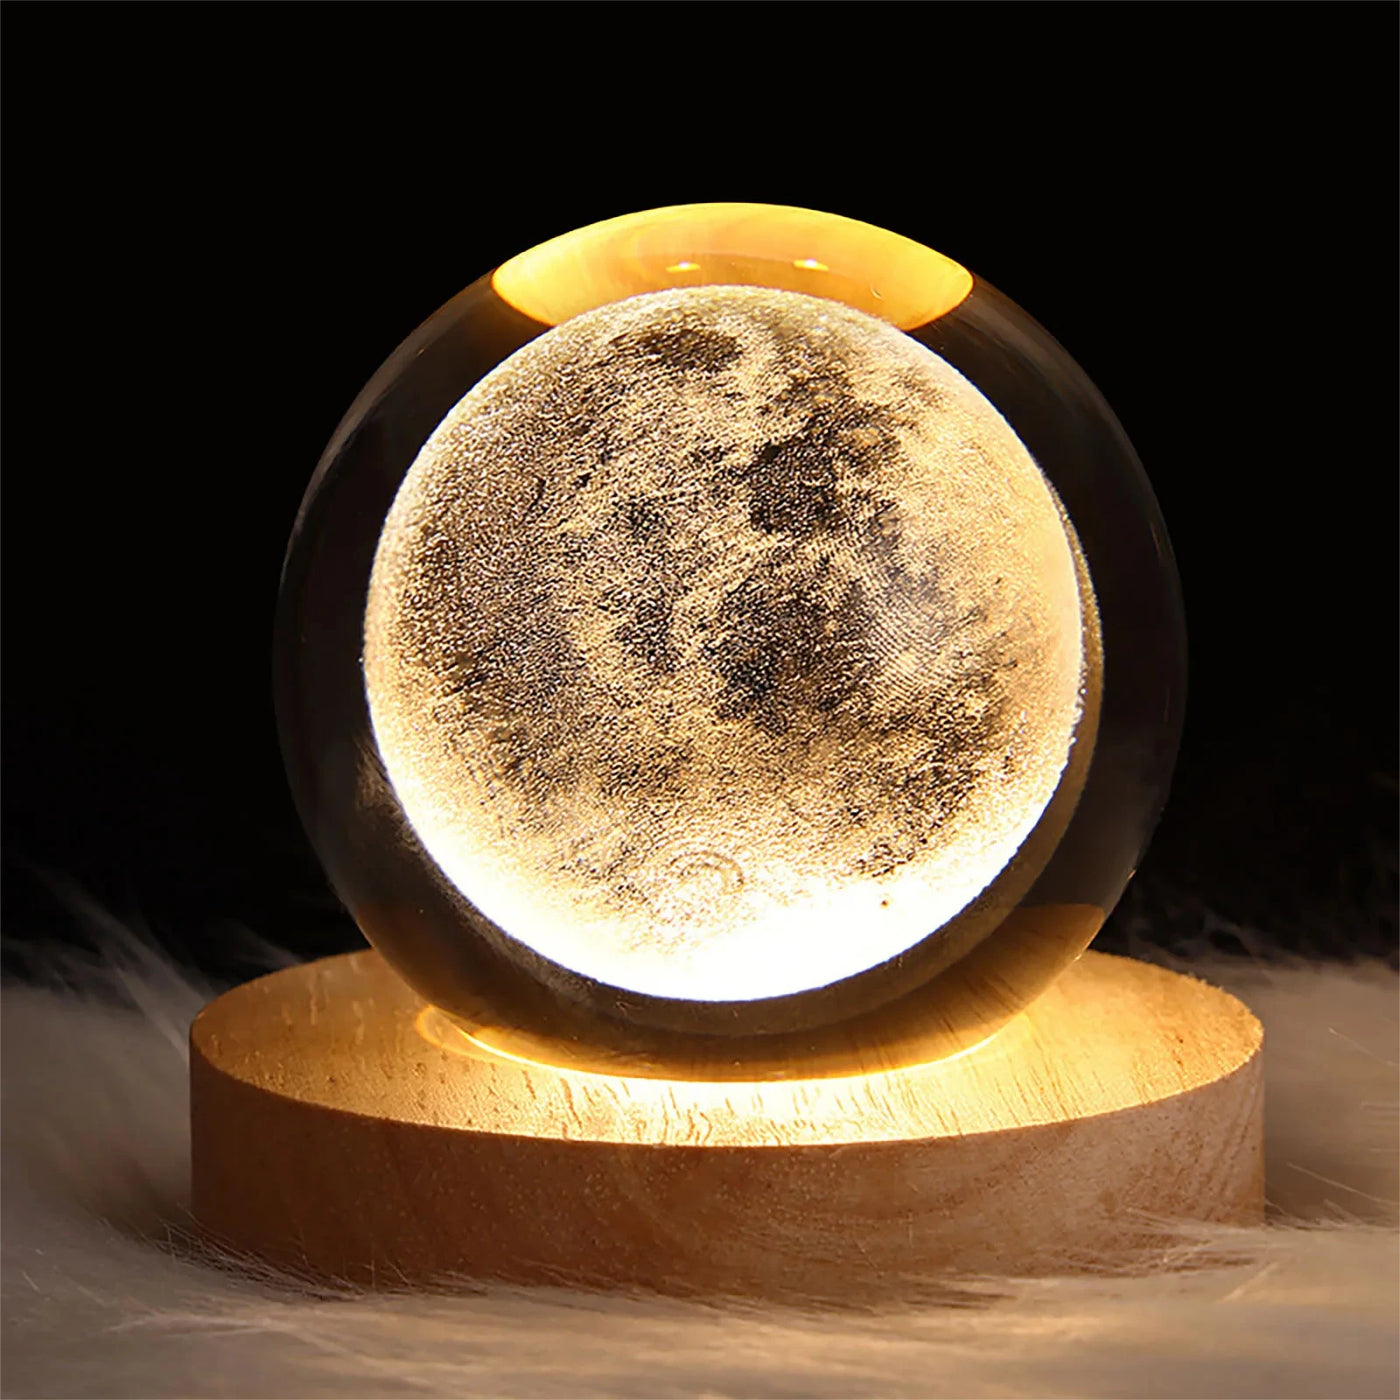 3D Crystal Ball Night Light - Glowing Planet, Galaxy, Moon, Astronaut Table Lamp for Kids' Gifts